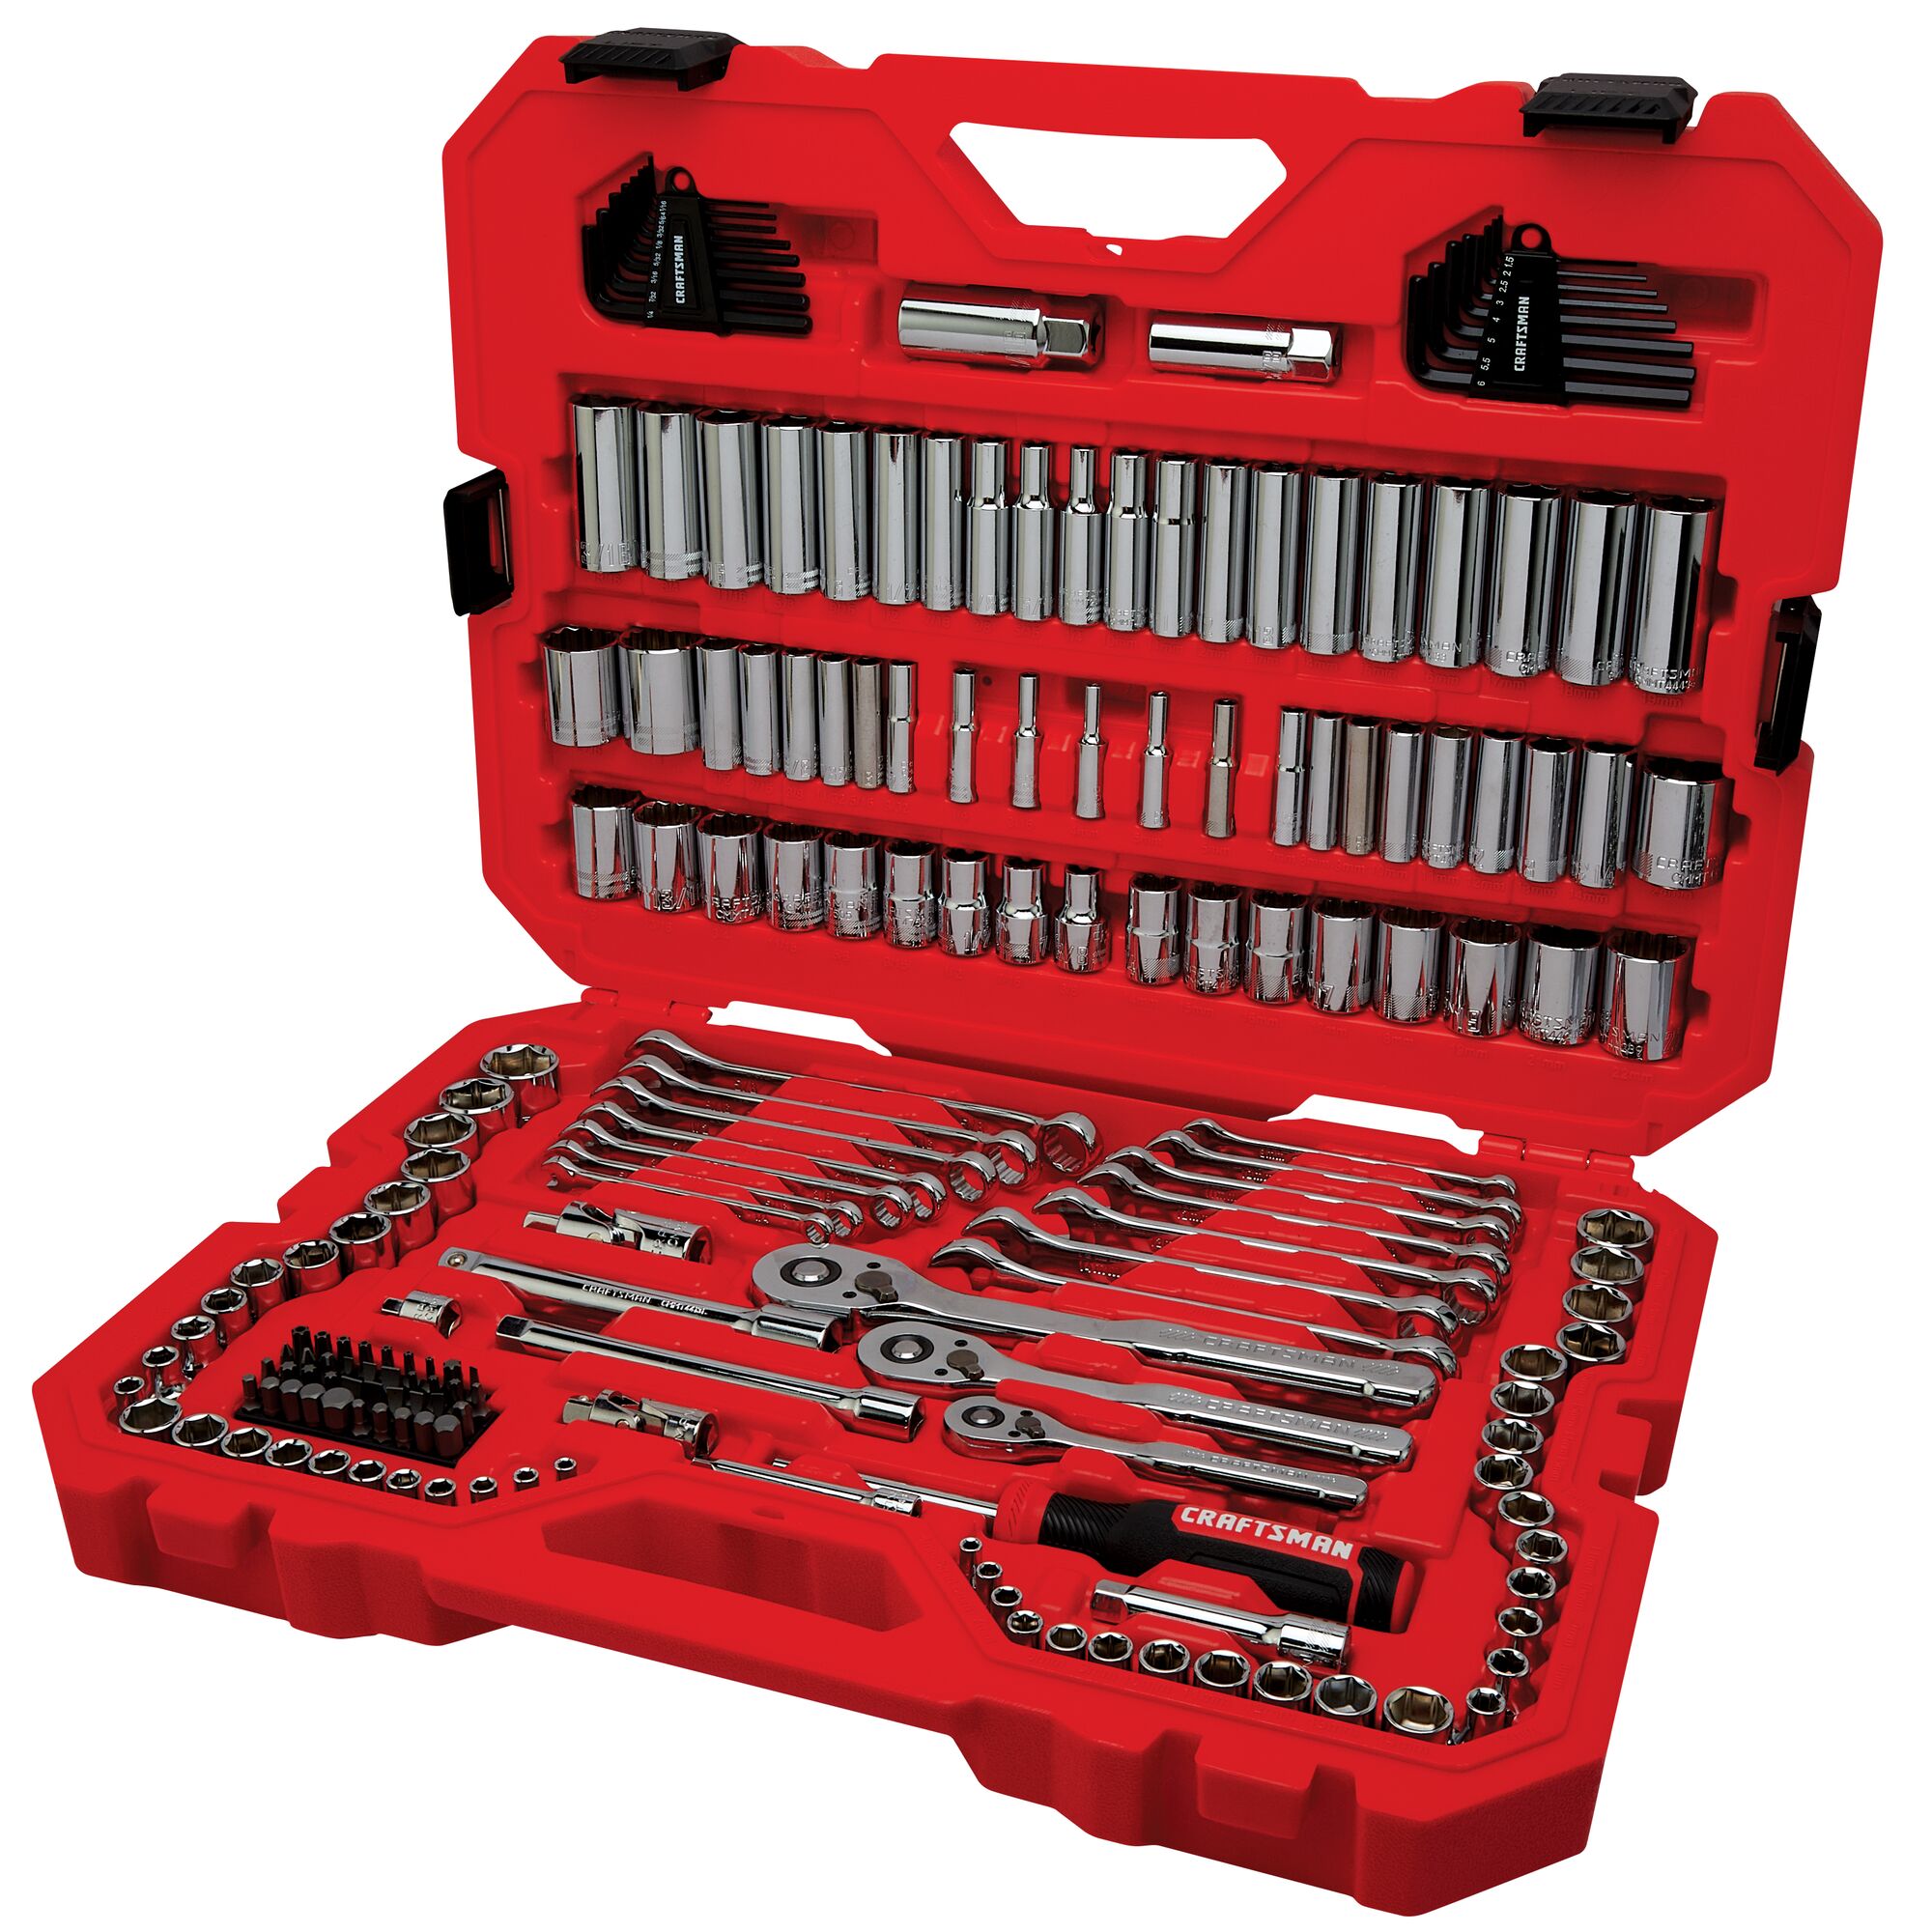 CRAFTSMAN 57-Piece Household Tool Set with Hard Case